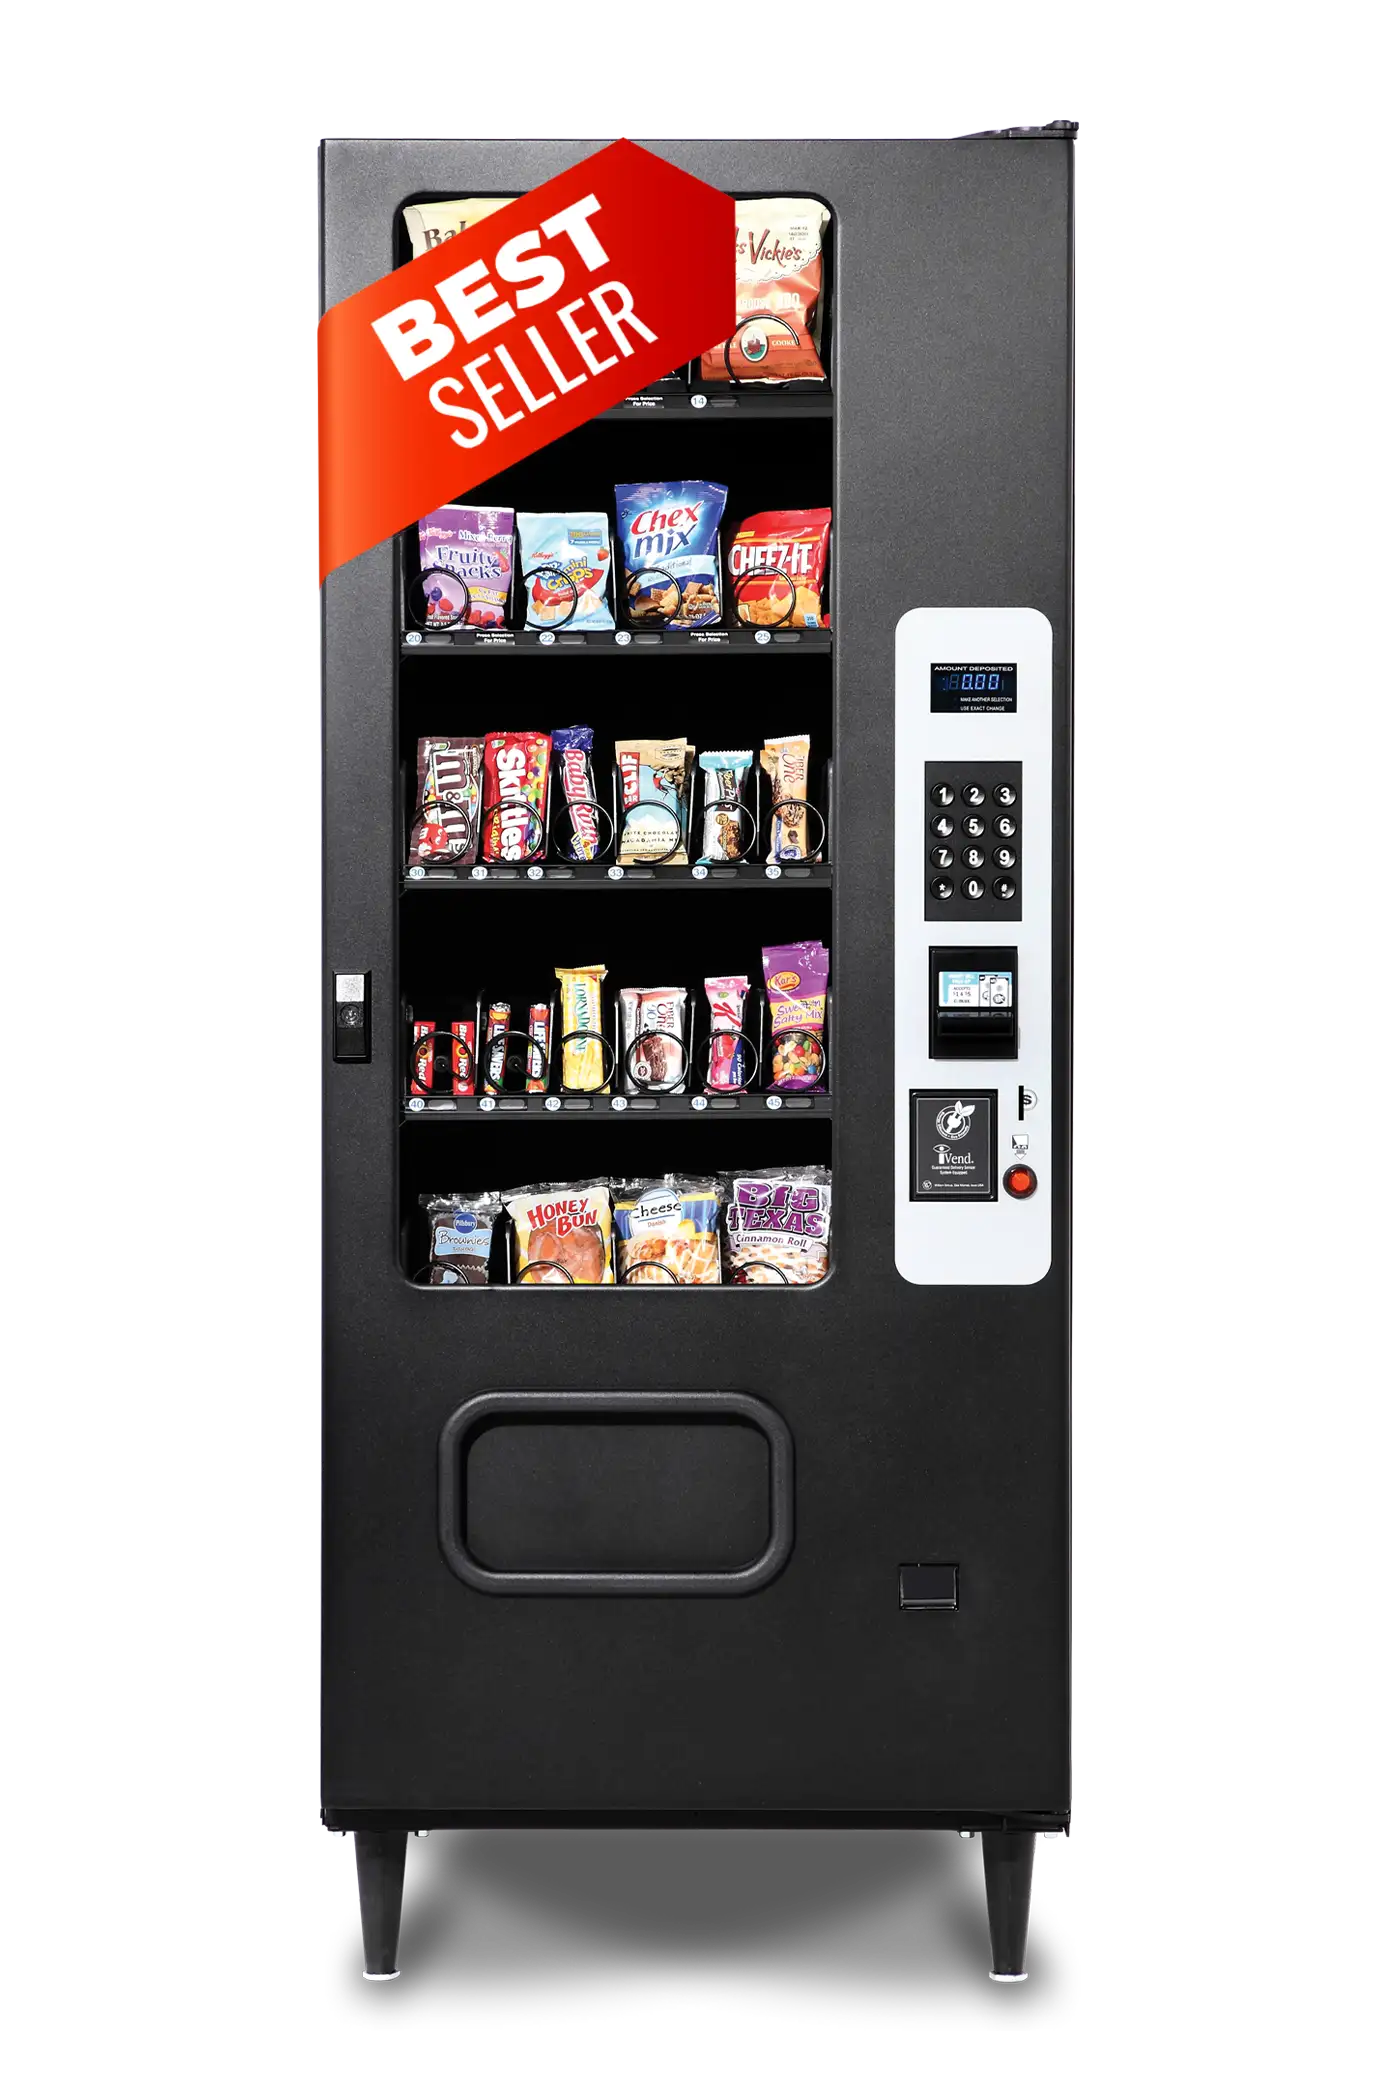 23 Selection Snack Vending Machine for sale